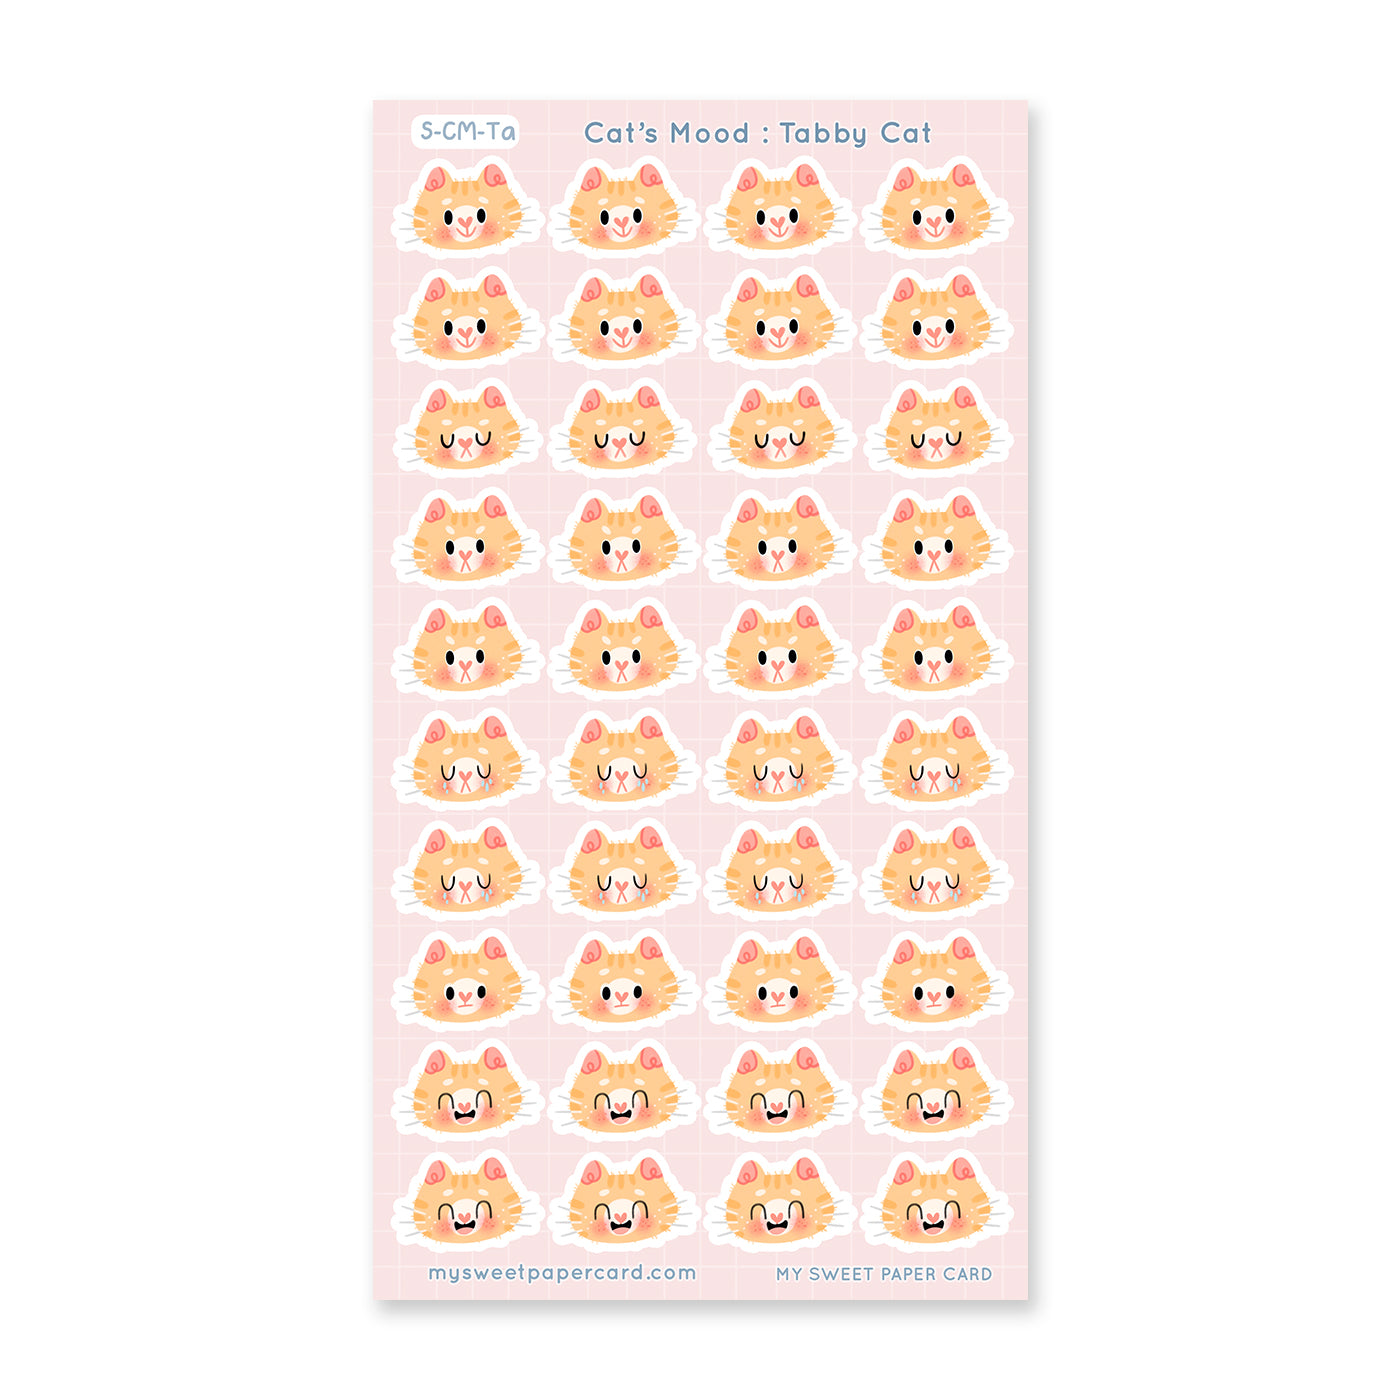 tabby cat stickers sheet with different moods